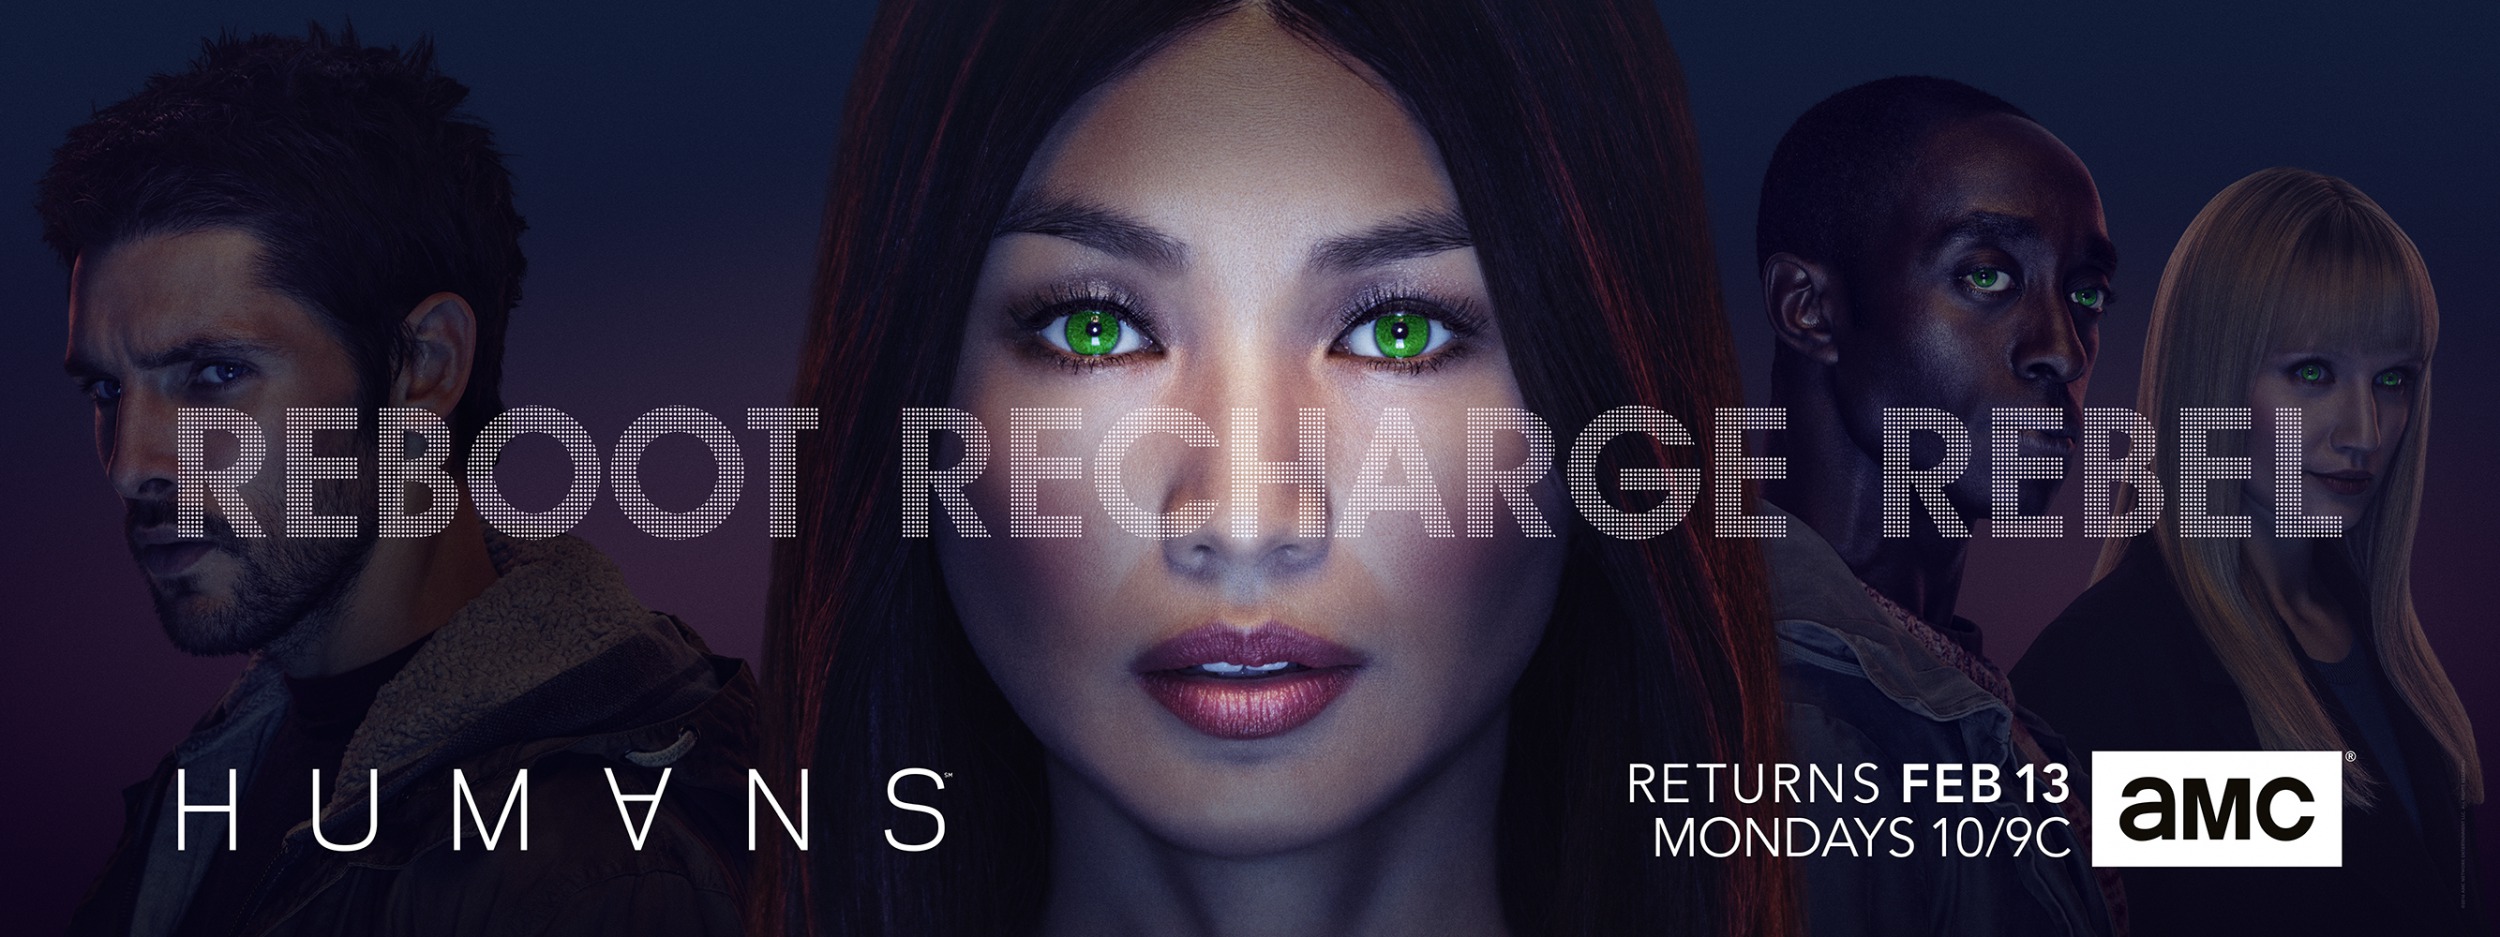 Mega Sized TV Poster Image for Humans (#3 of 3)